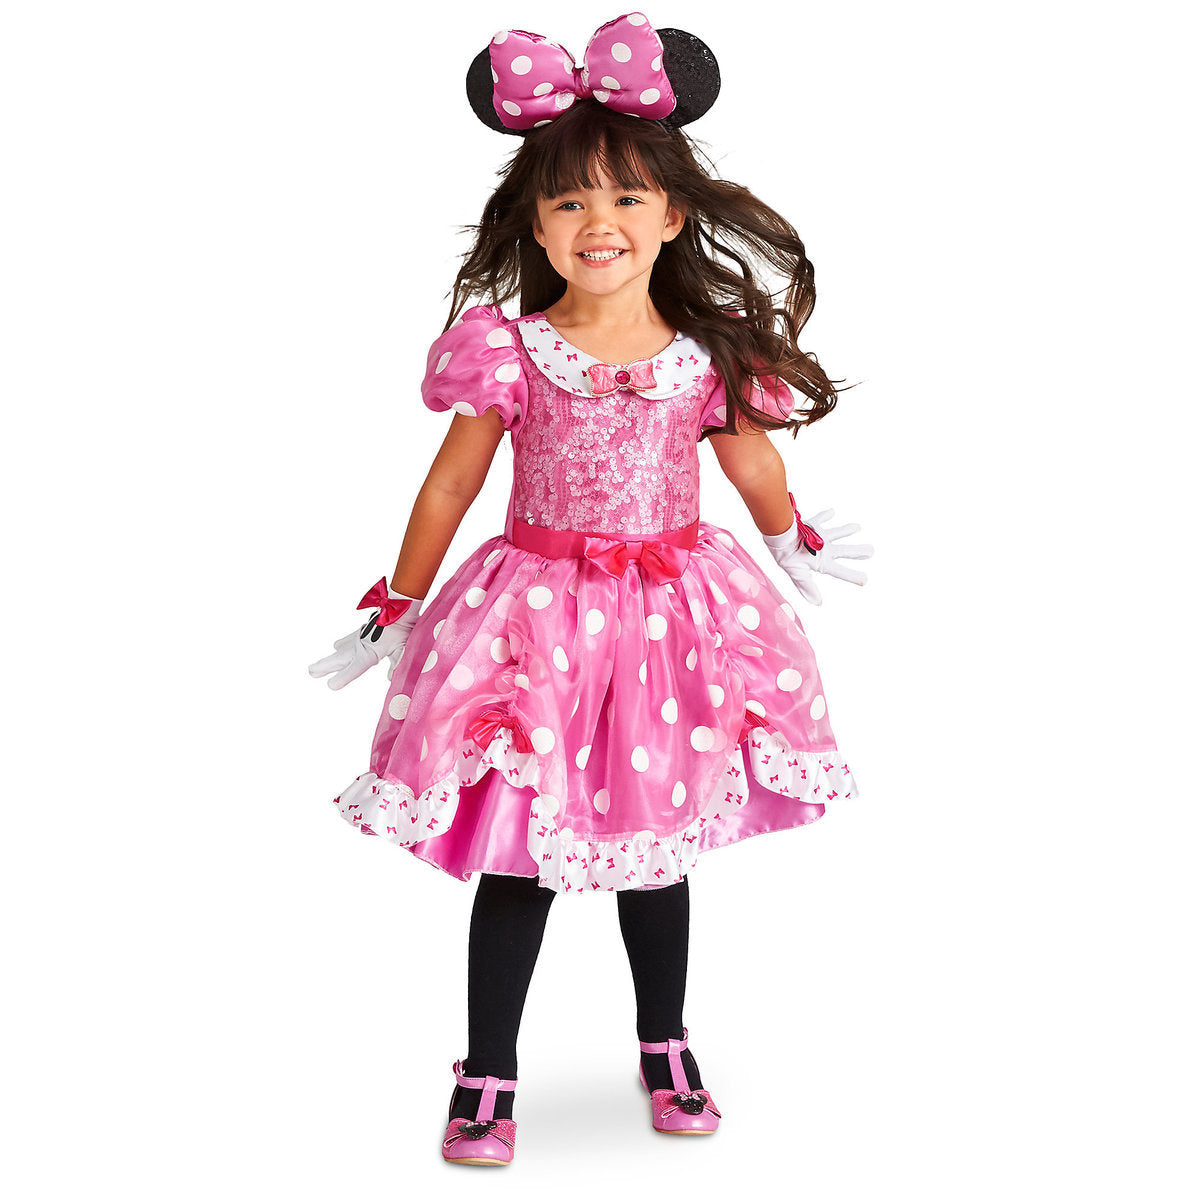 Minnie Mouse Costume for Kids - Pink.